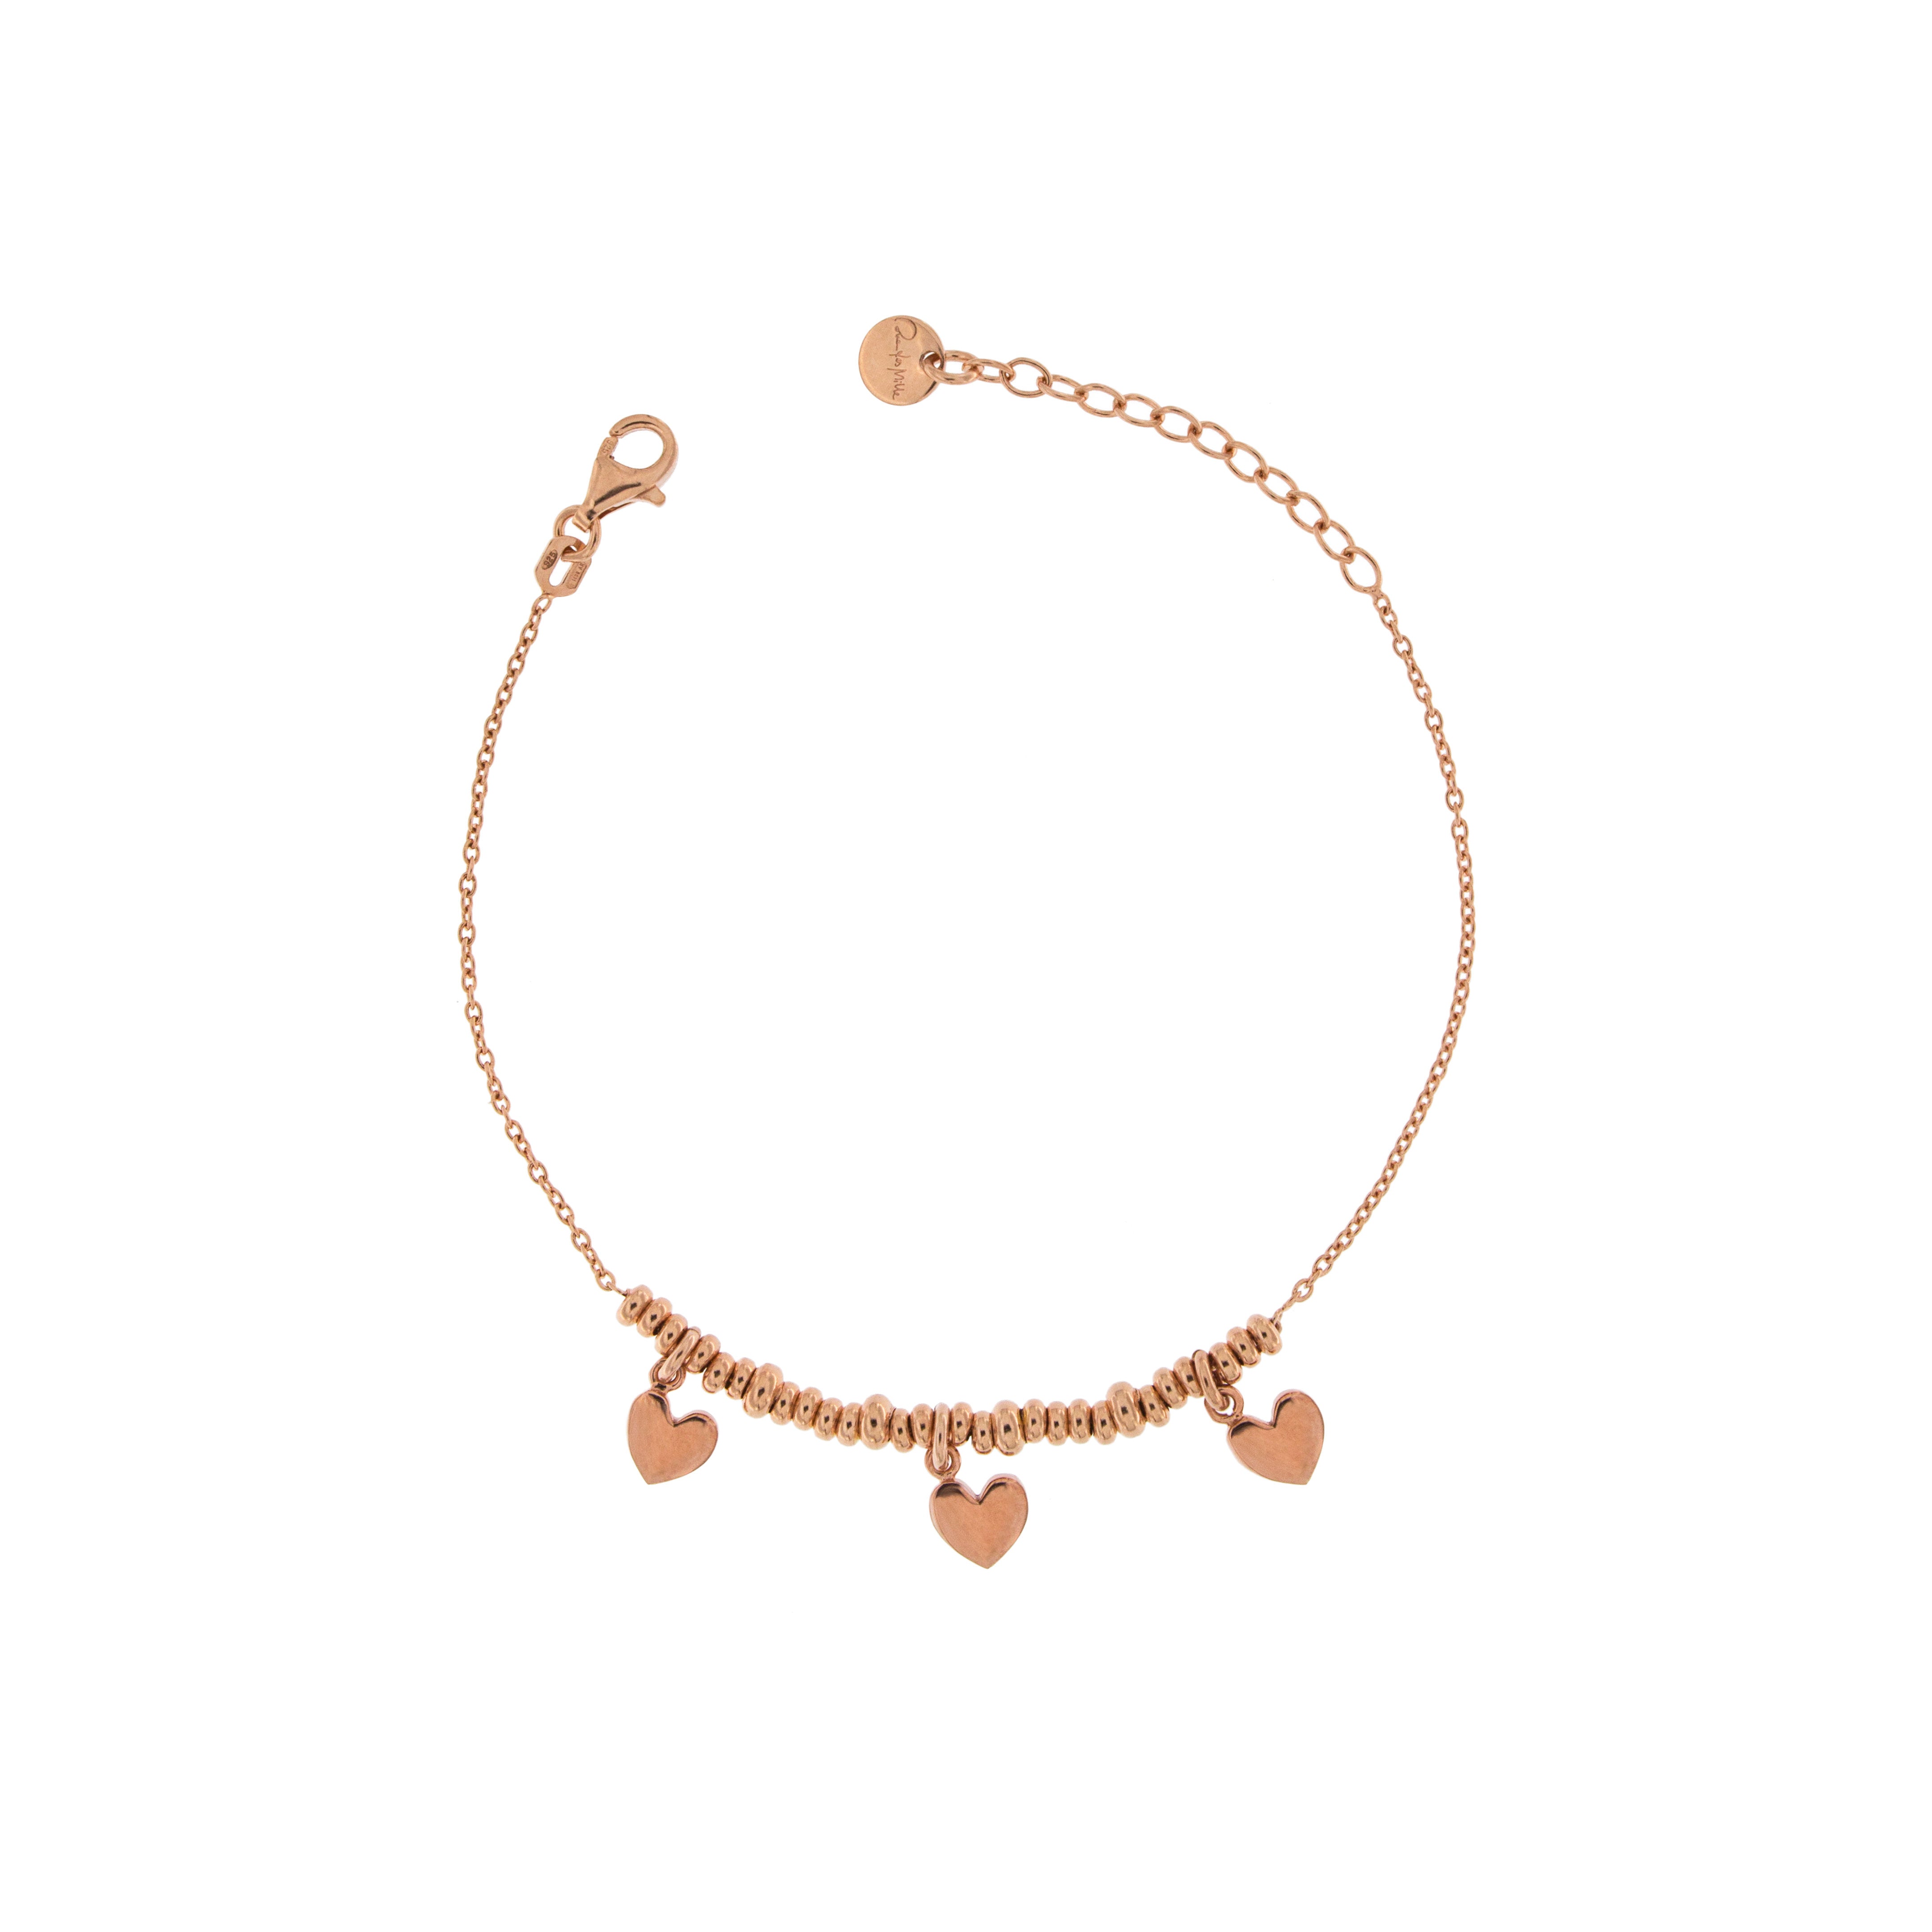 Bracelets - Bracelet with Three Hearts and micro circles - 1 | Rue des Mille